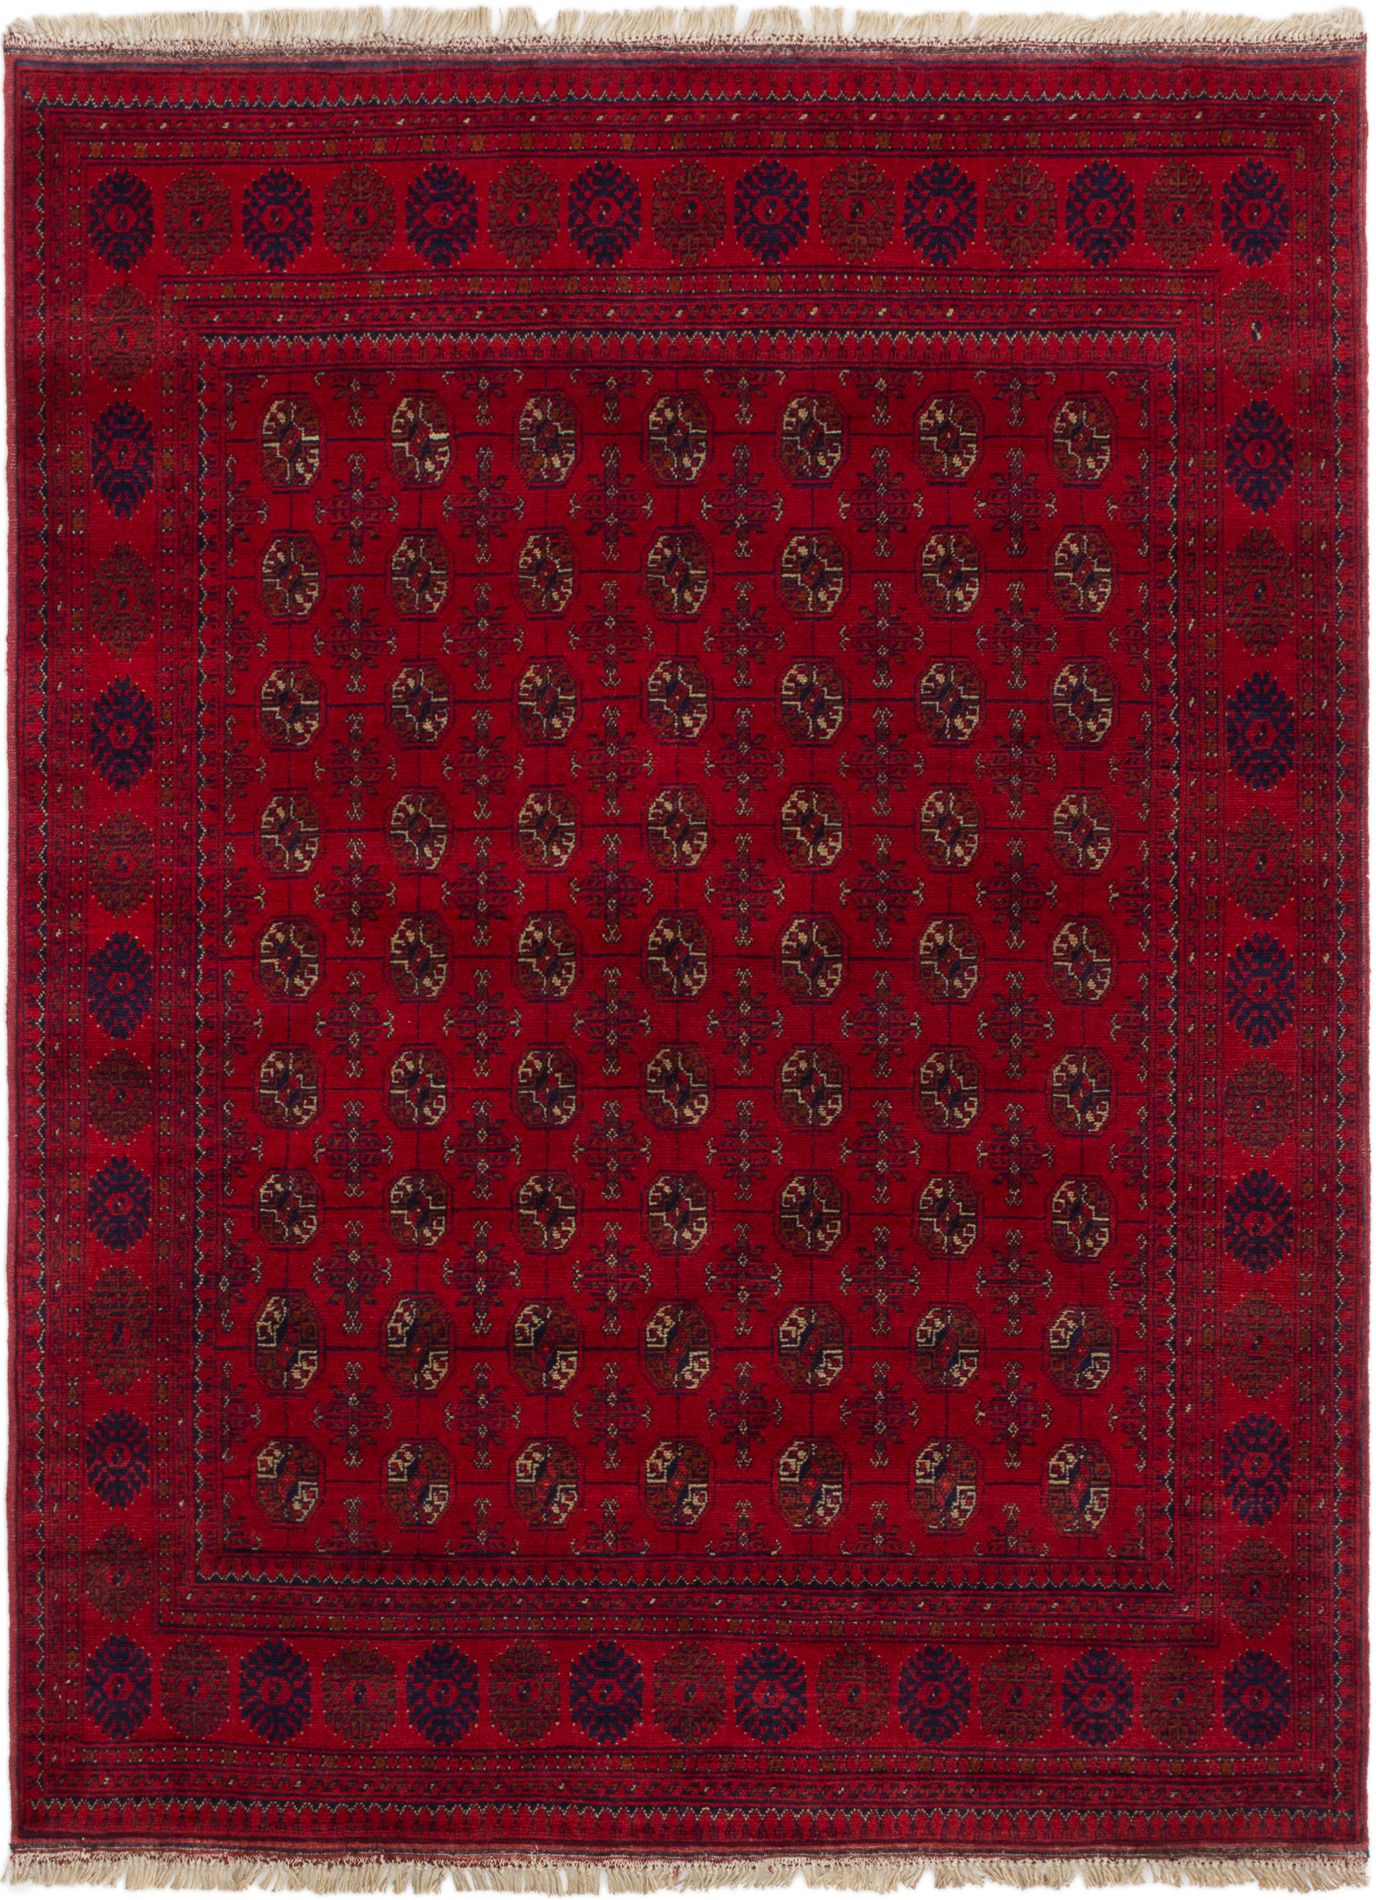 Hand-knotted Finest Khal Mohammadi Red Wool Rug 5'0" x 6'7"  Size: 5'0" x 6'7"  